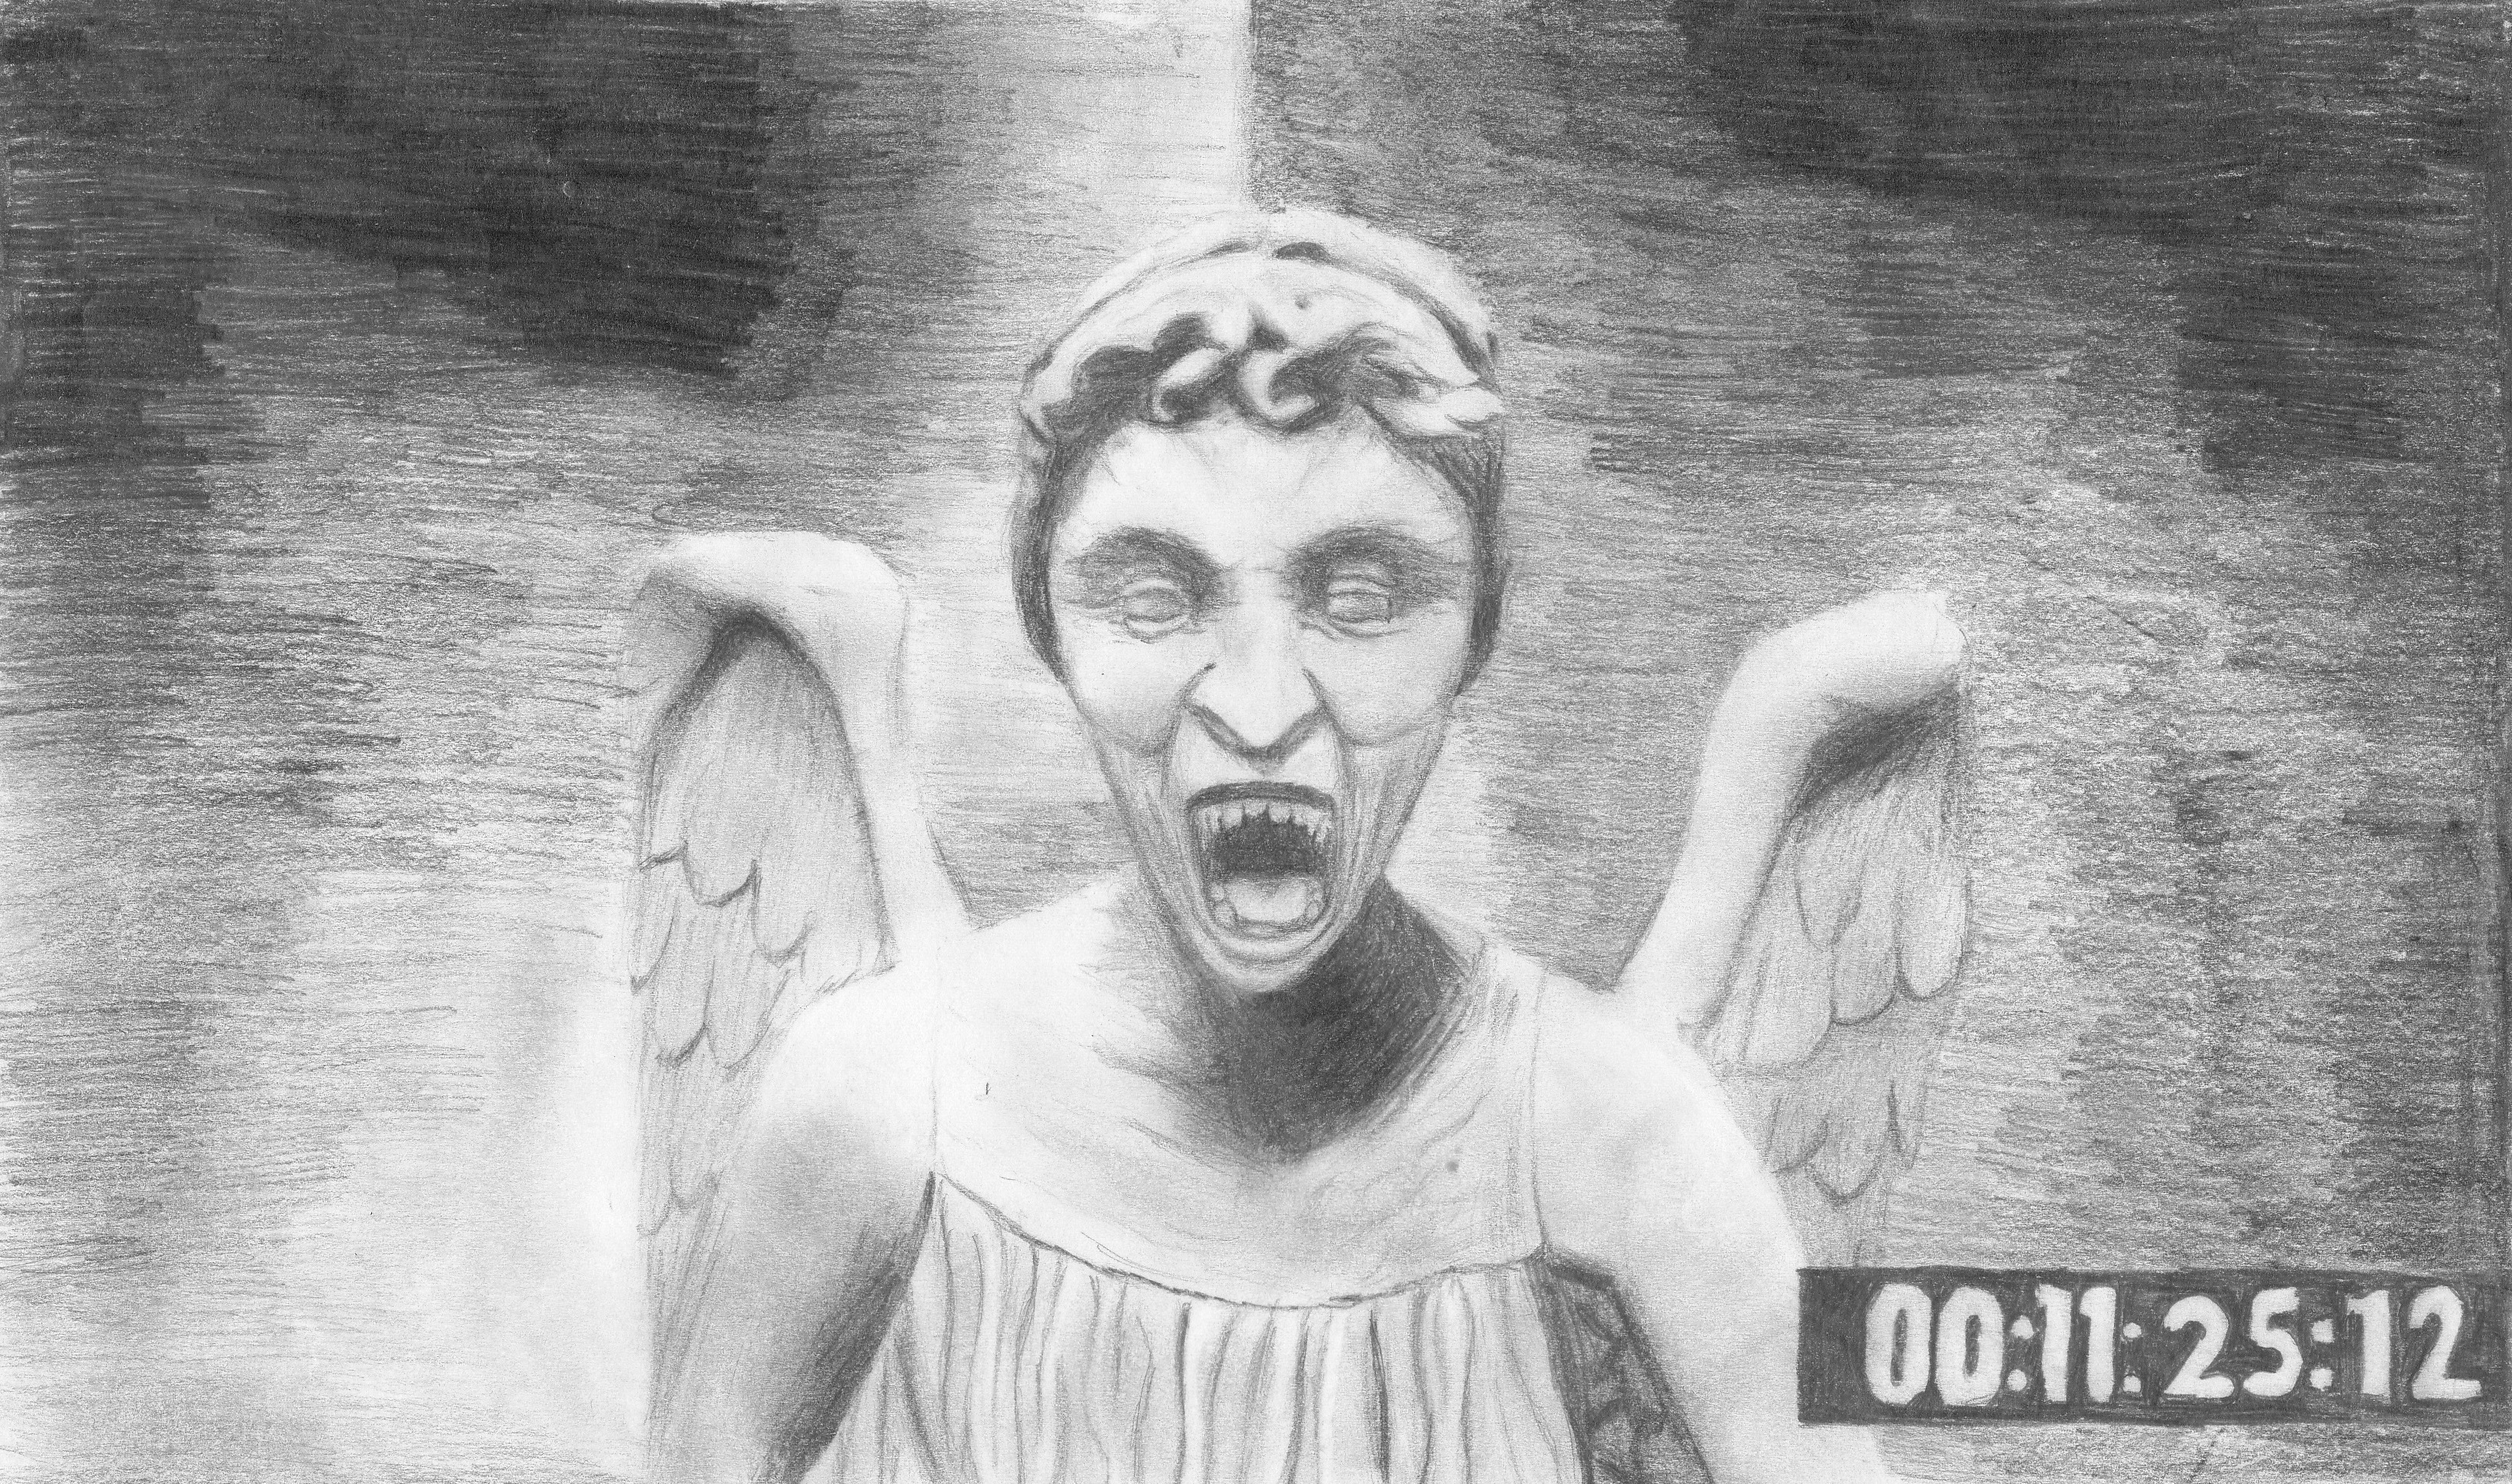 The Weeping Angel by ravenous hunger on DeviantArt